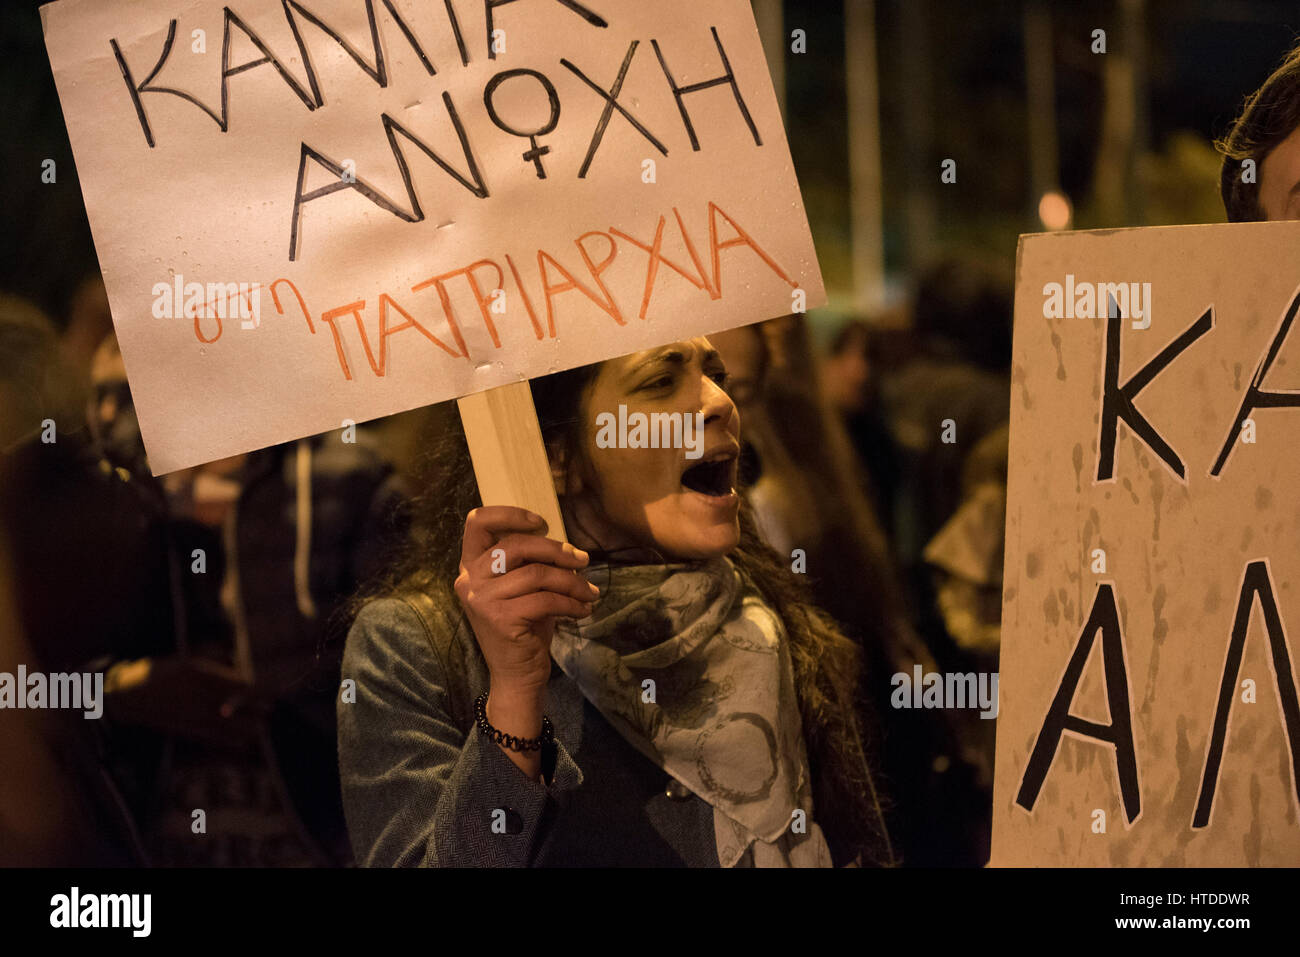 Women and men march in the streets of Athens shouting slogans and holding placards. Feminist, leftist and human rights organizations staged a demonstration to honor International Women's Day and demand equal rights. © Nikolas Georgiou / Alamy Live News Stock Photo